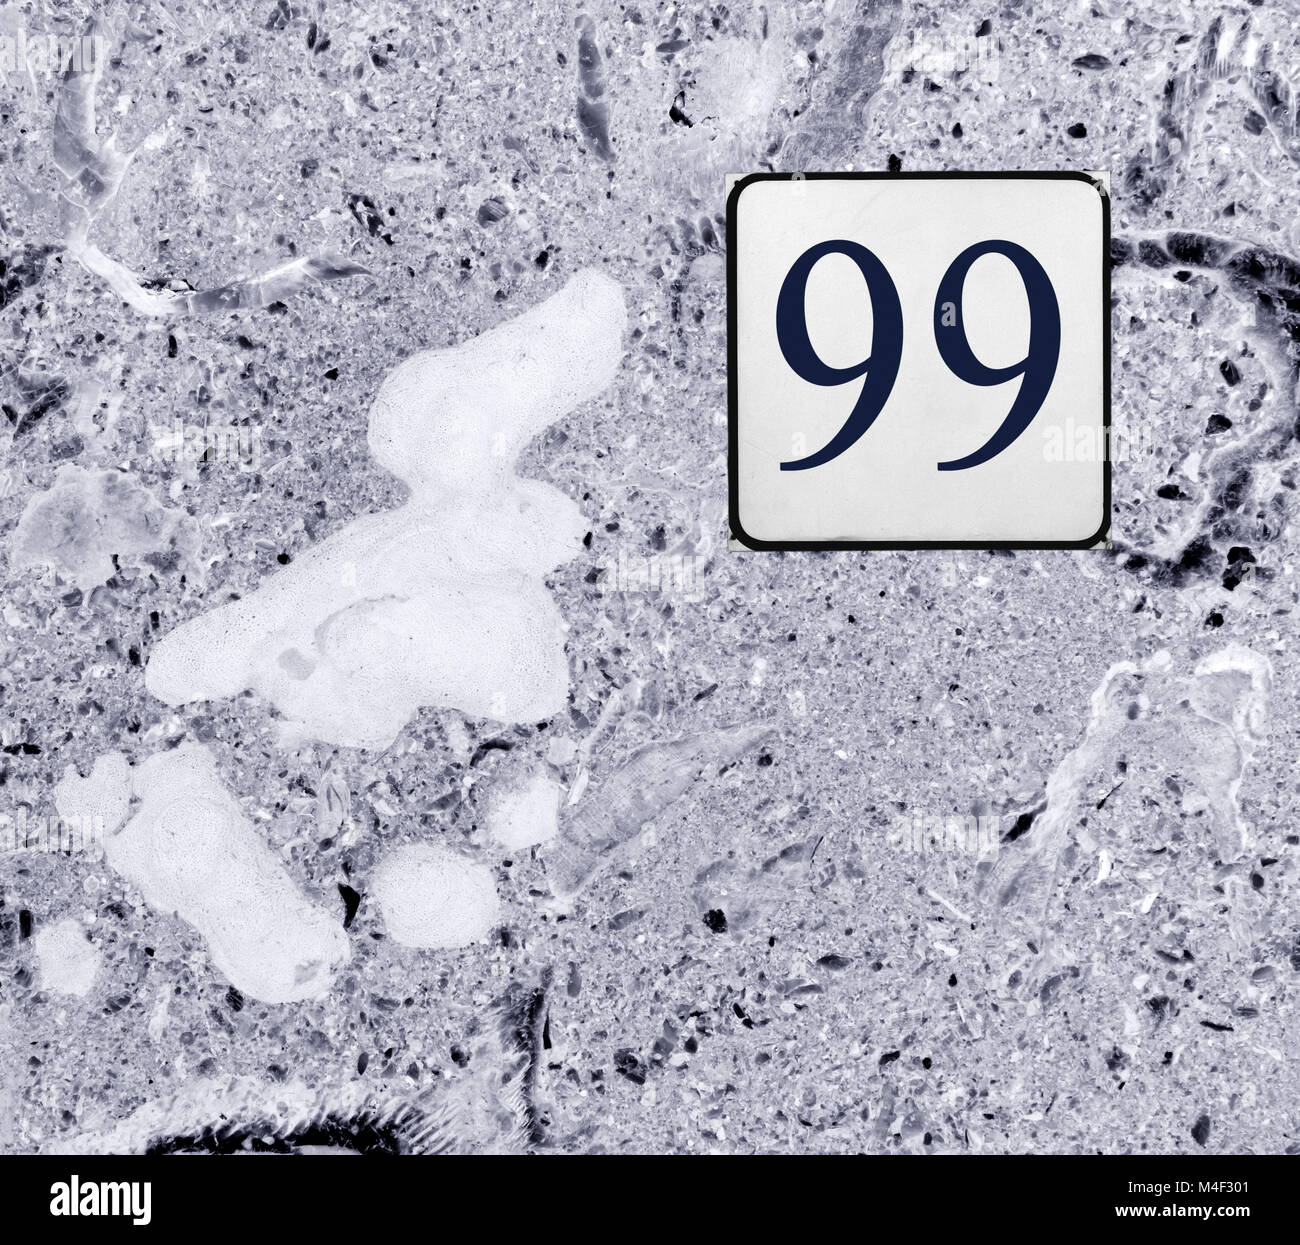 Street number 99 sign on gray-colored marble texture Stock Photo